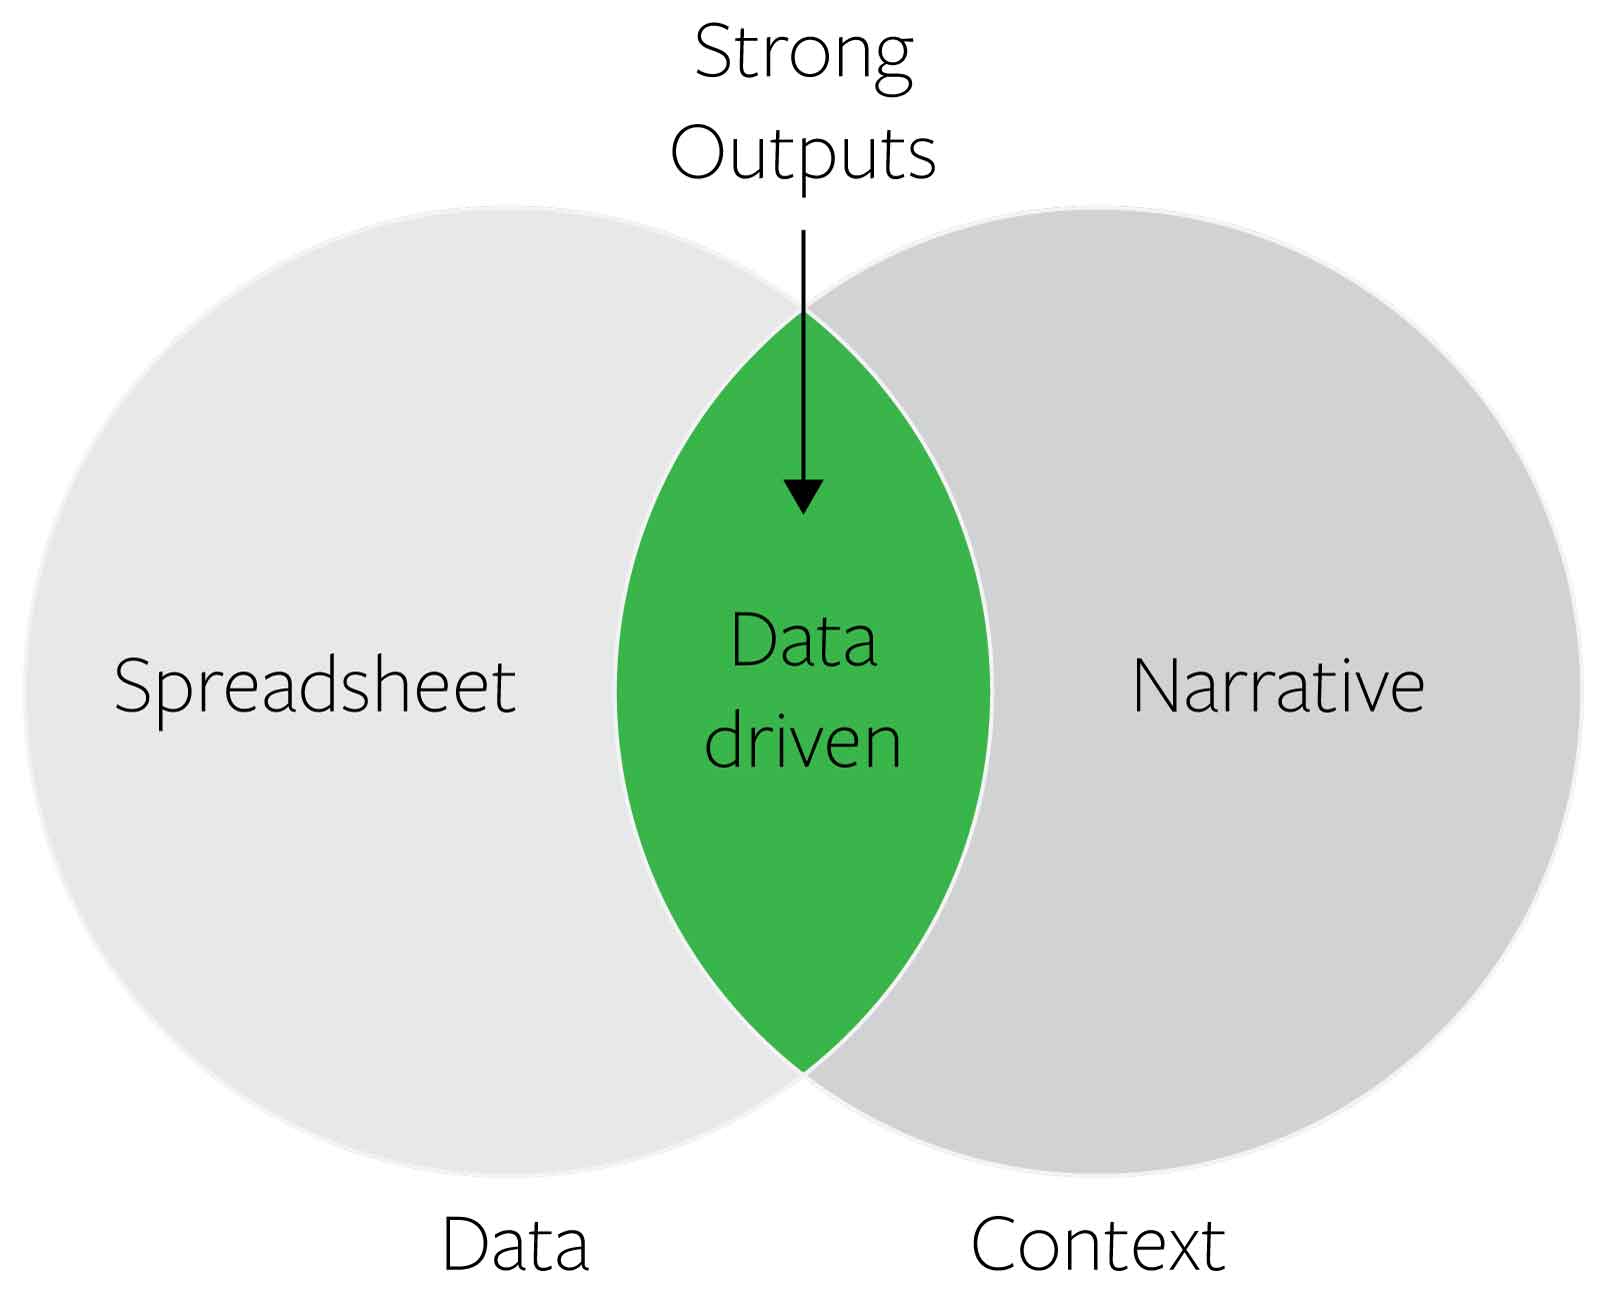 Strong outputs are data-driven